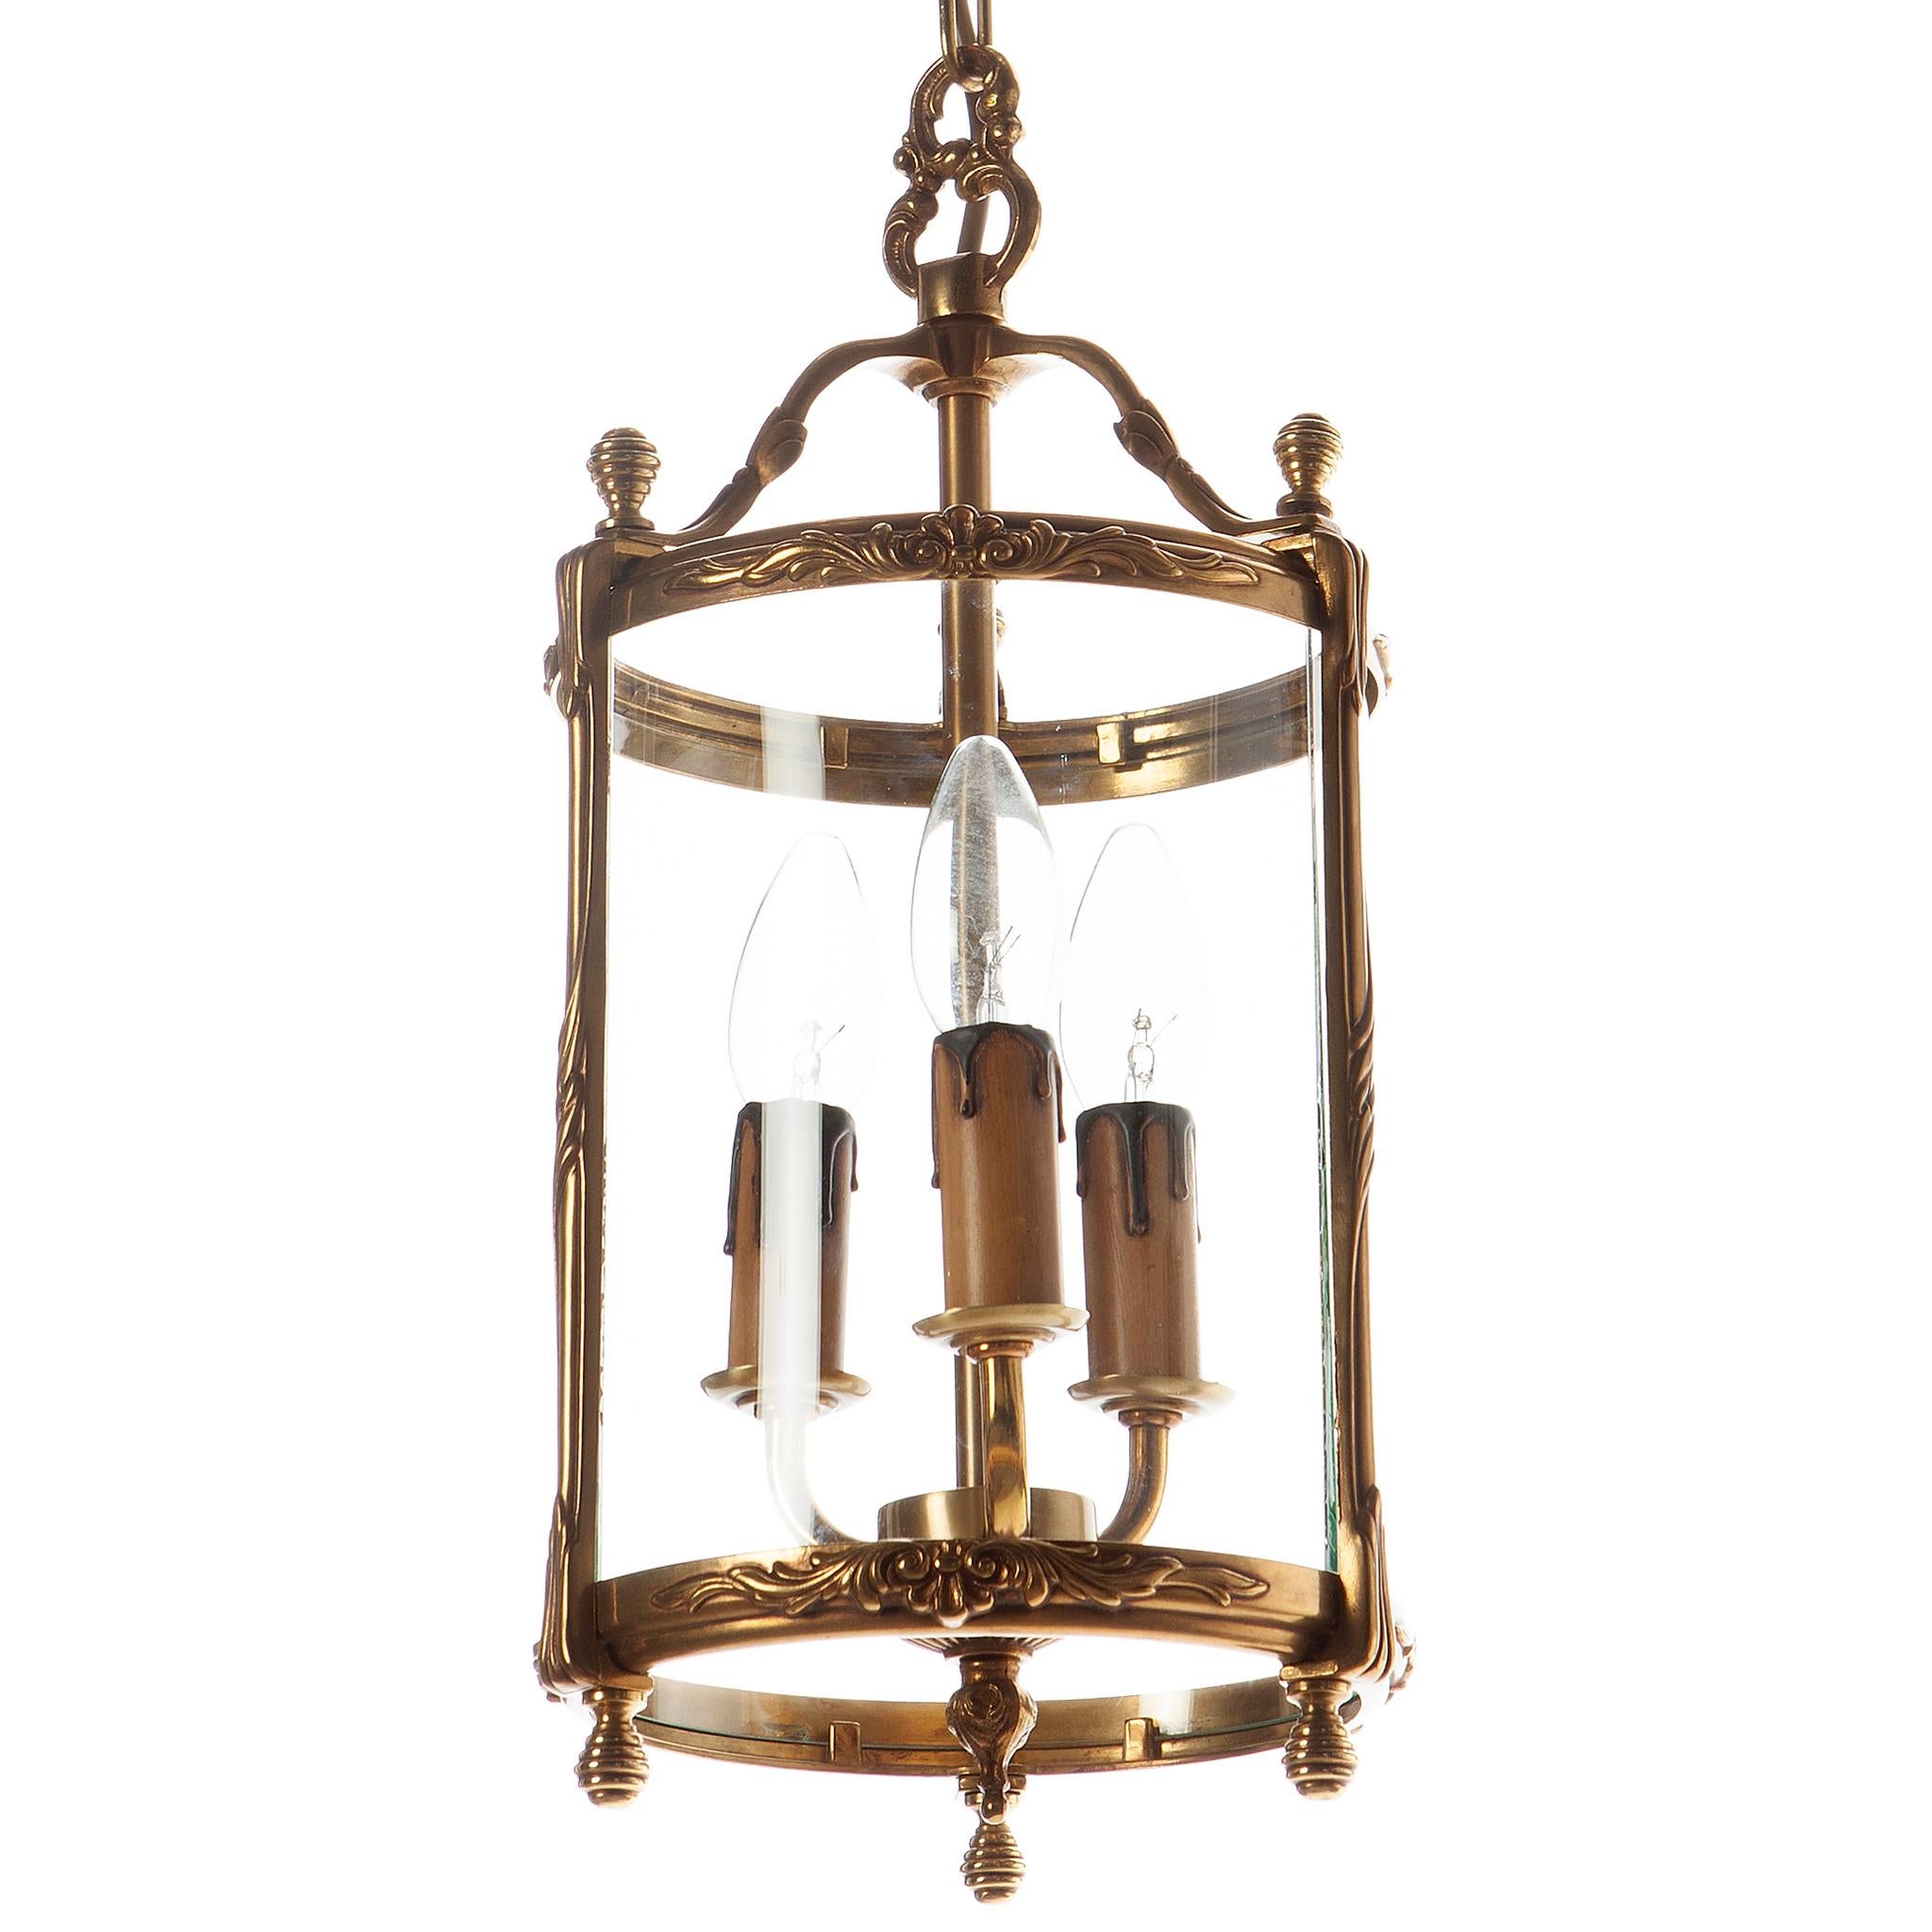 A neoclassical hall lantern of great design. A heavy cast brass base surrounded by four sectional circular convex glass panels.